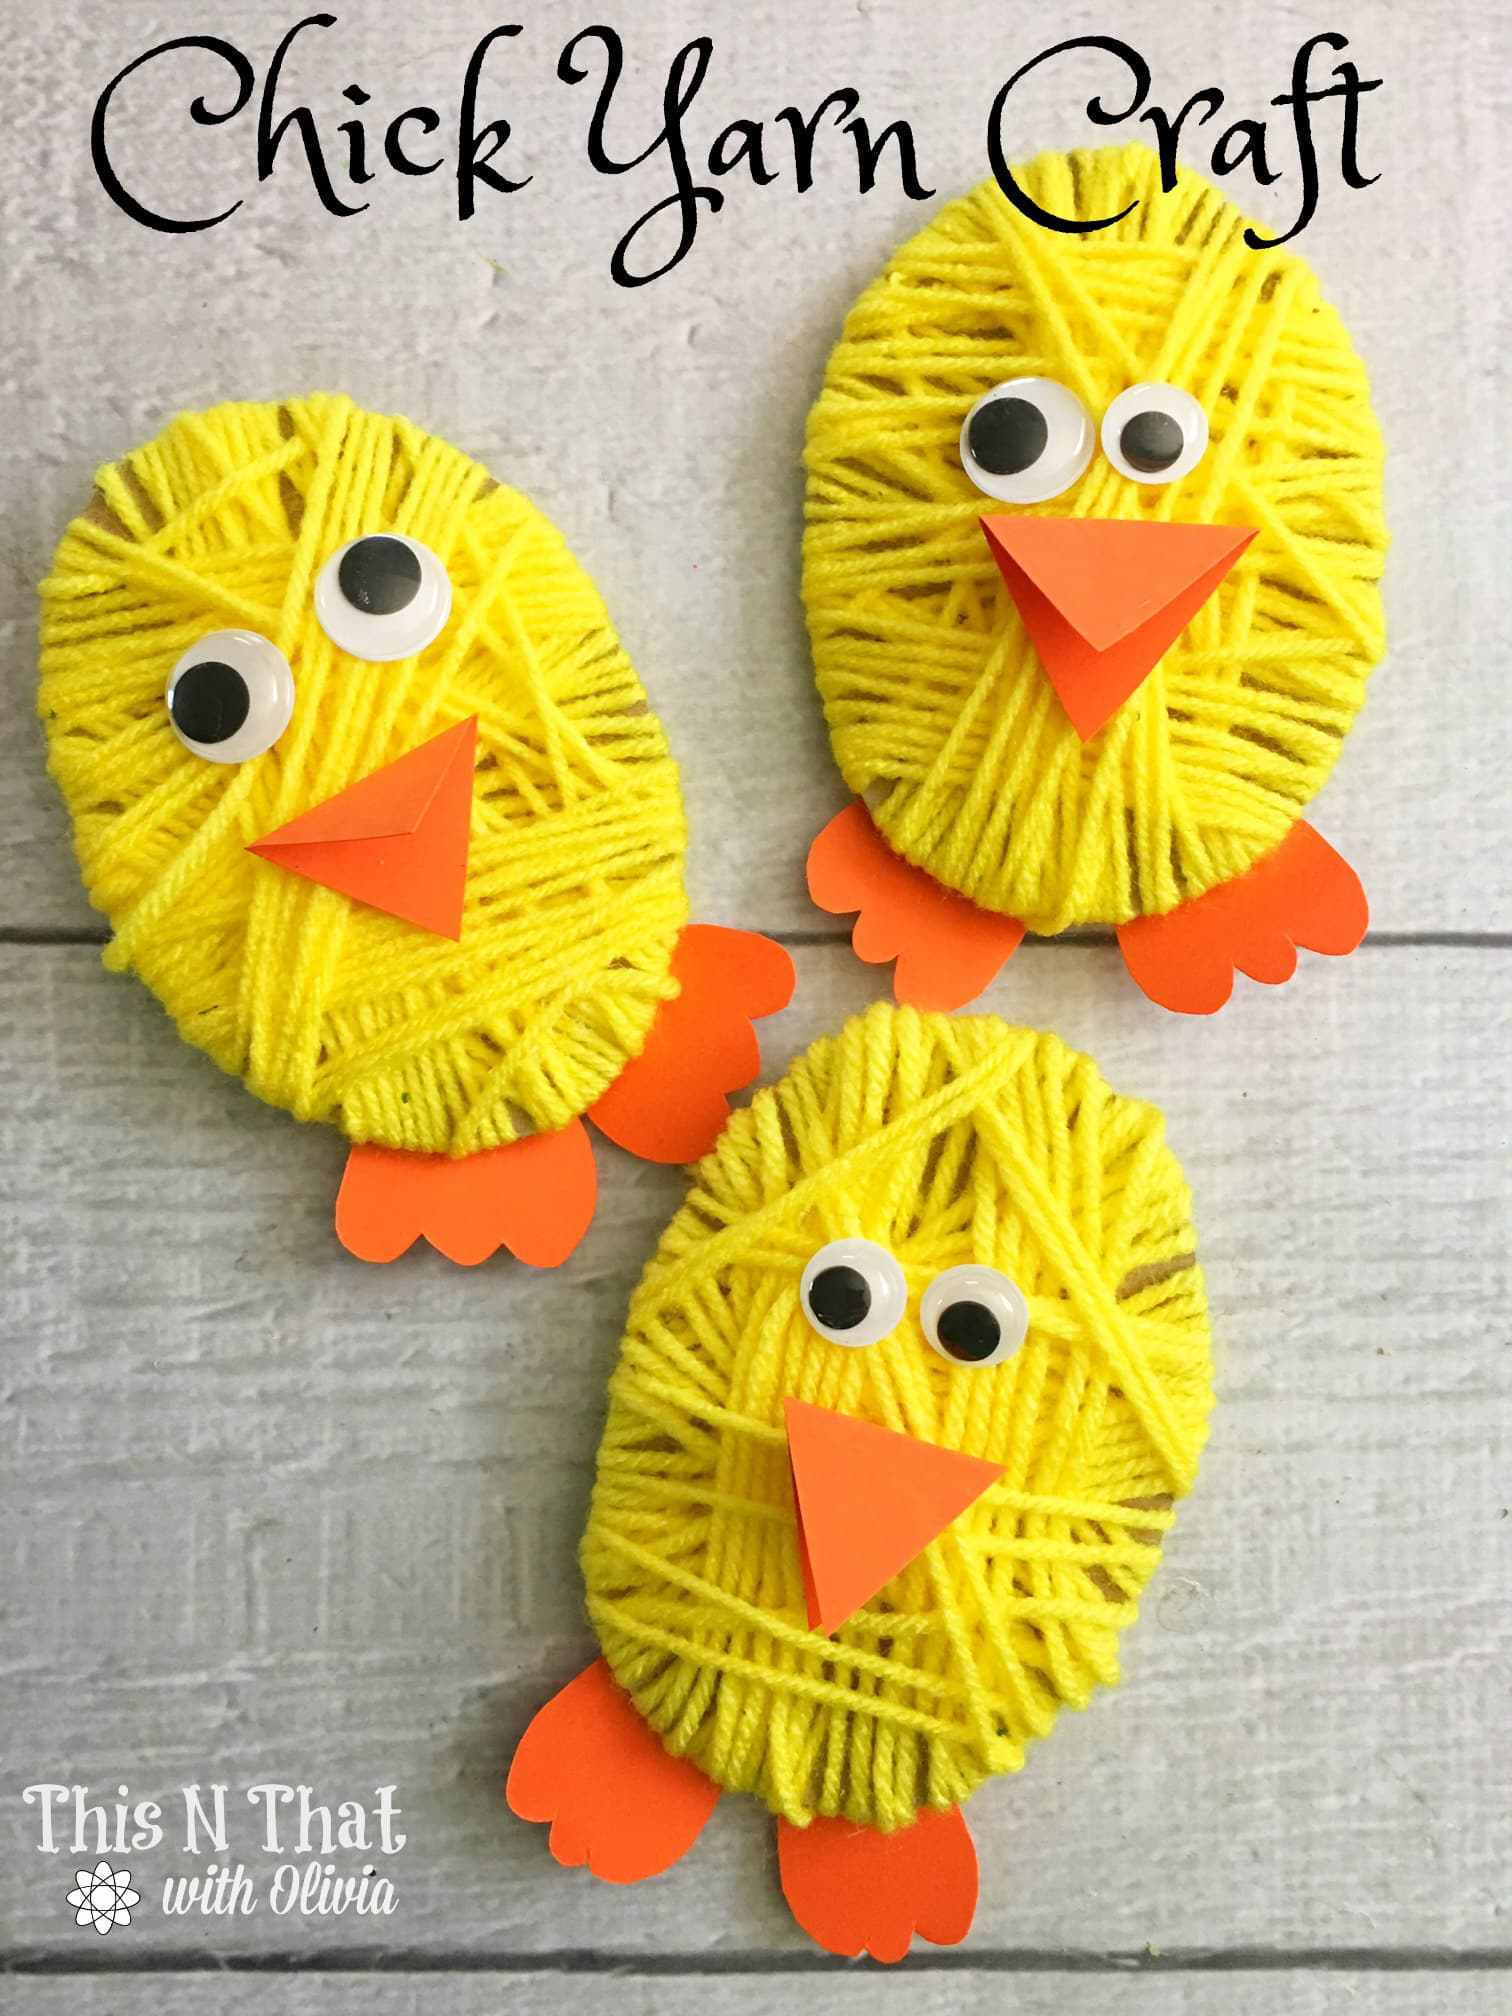 Toddler Craft Ideas
 Over 33 Easter Craft Ideas for Kids to Make Simple Cute